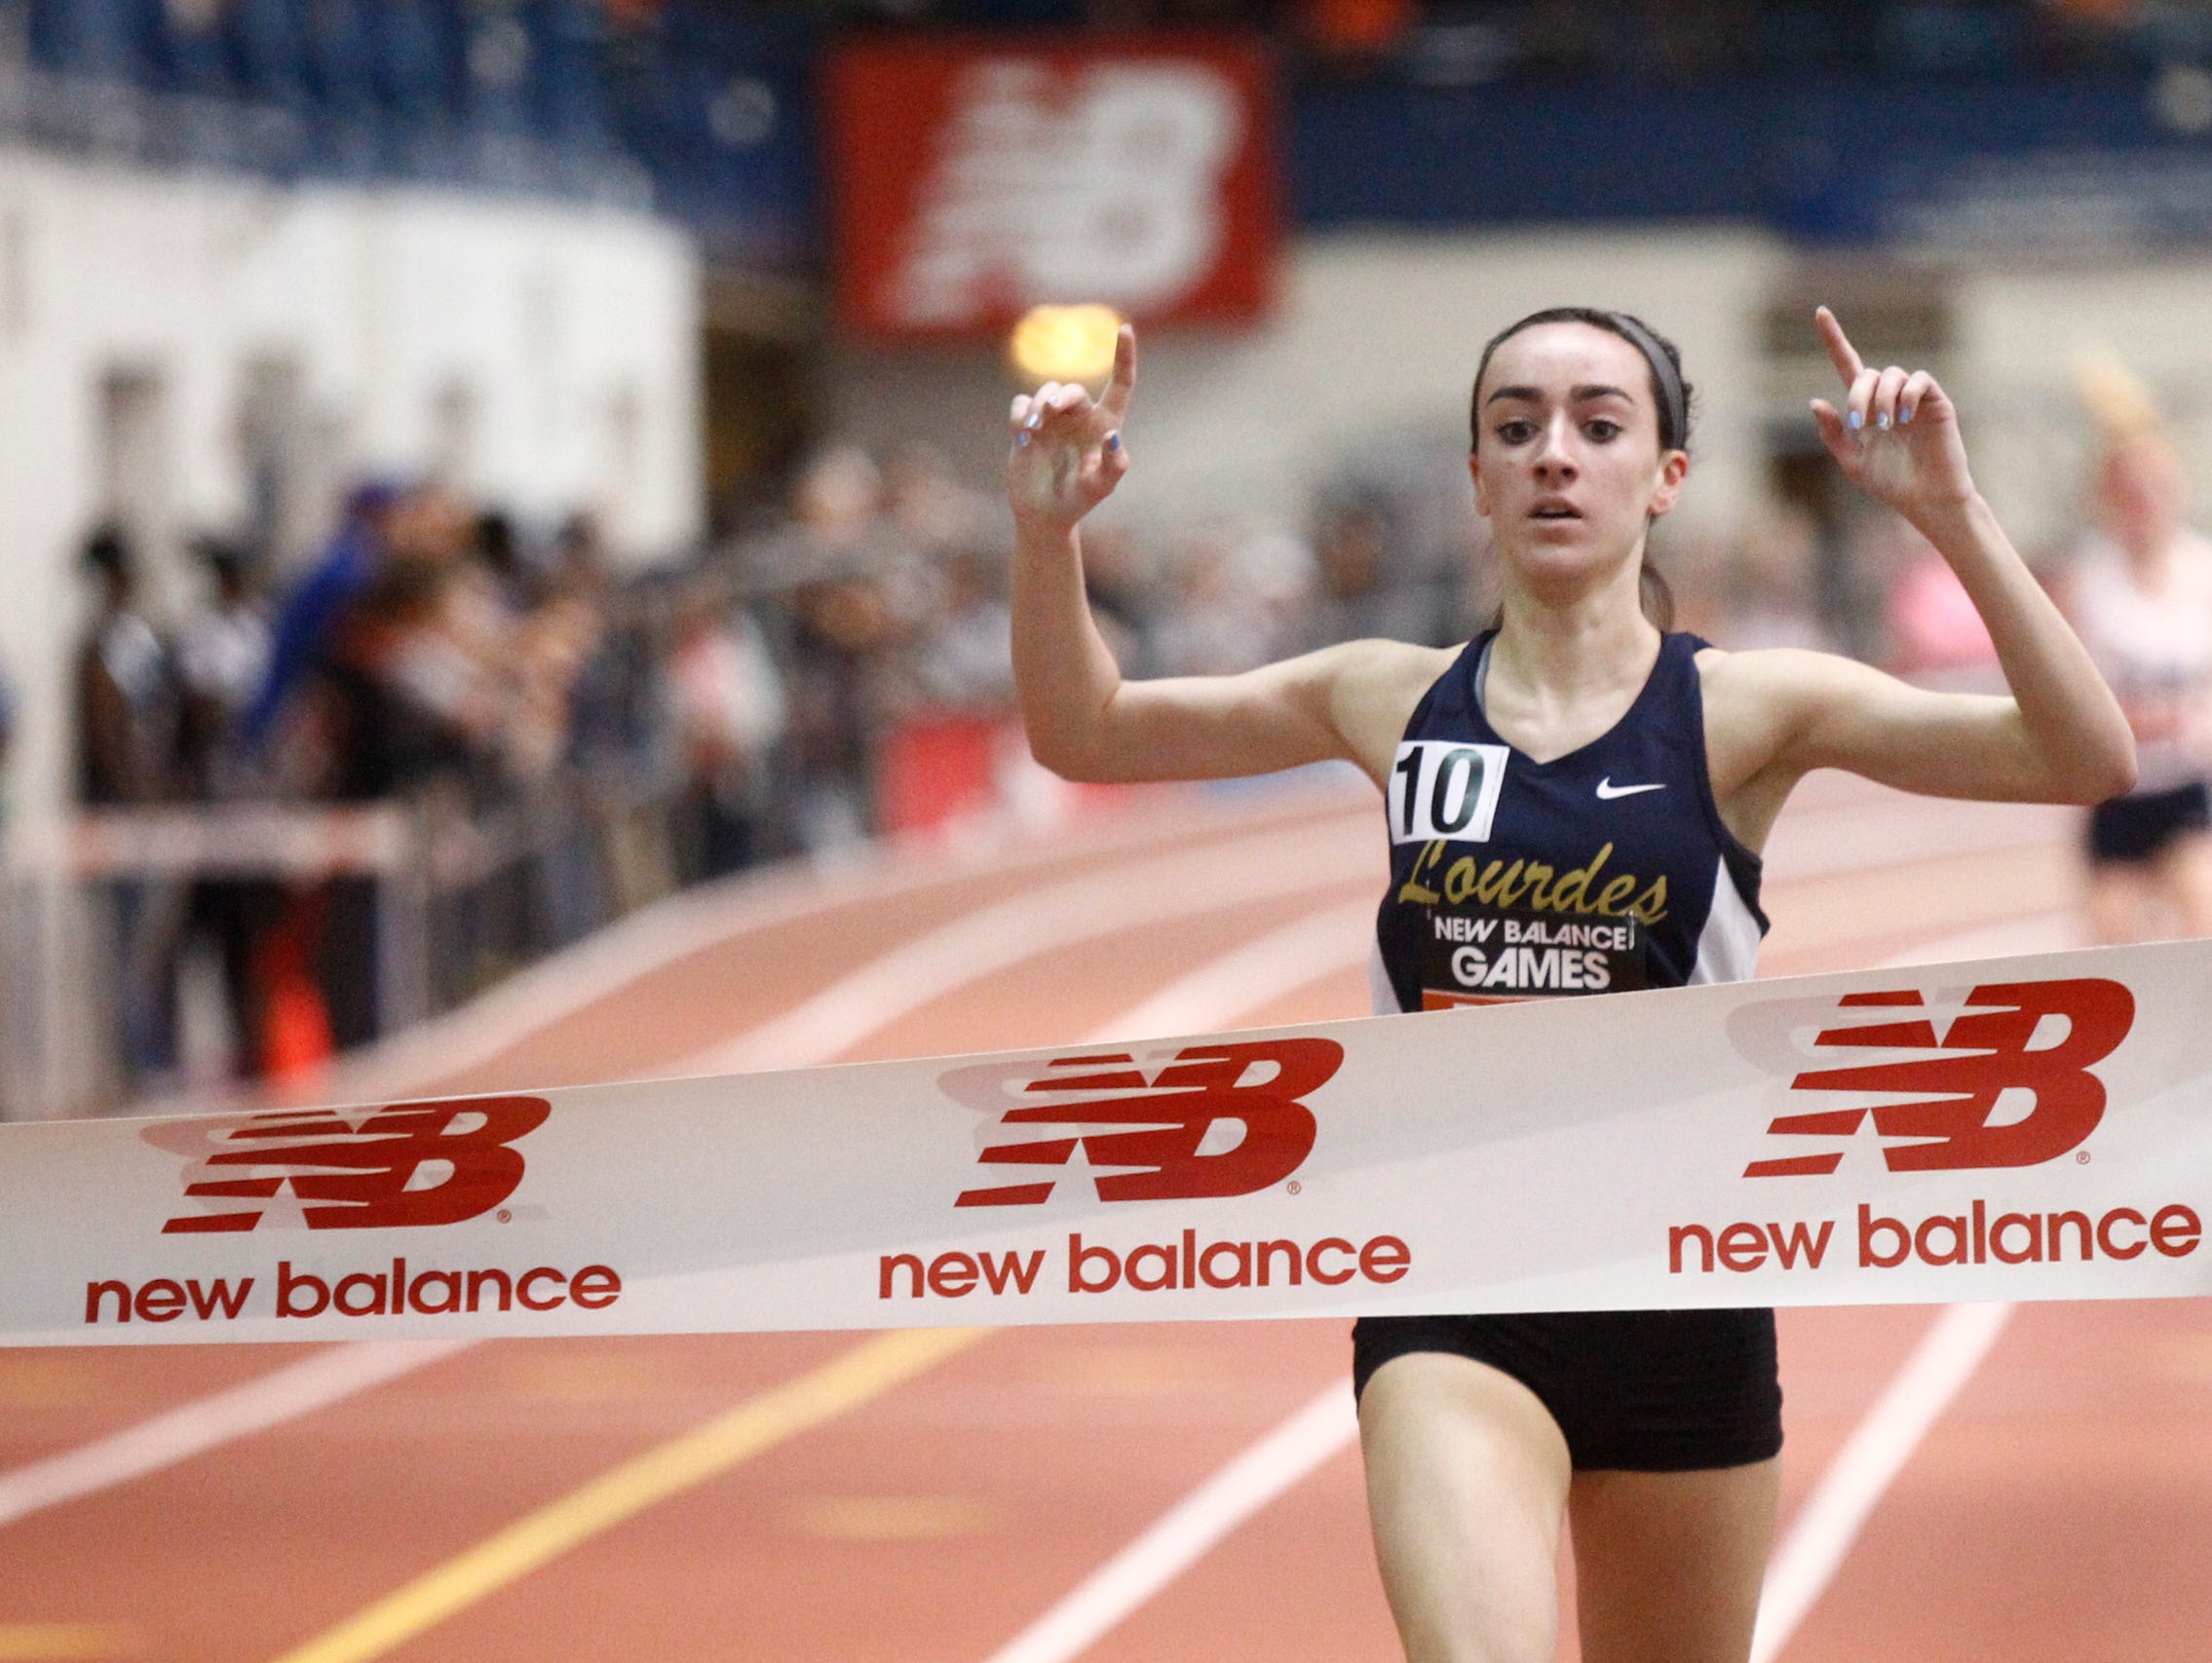 Our Lady of Lourdes' Caroline Timm finishes in first place with a 4:56.25 time in the mile run during the 22nd annual New Balance Games at The Armory New Balance Track & Field Center in New York on Saturday, January 21, 2017.